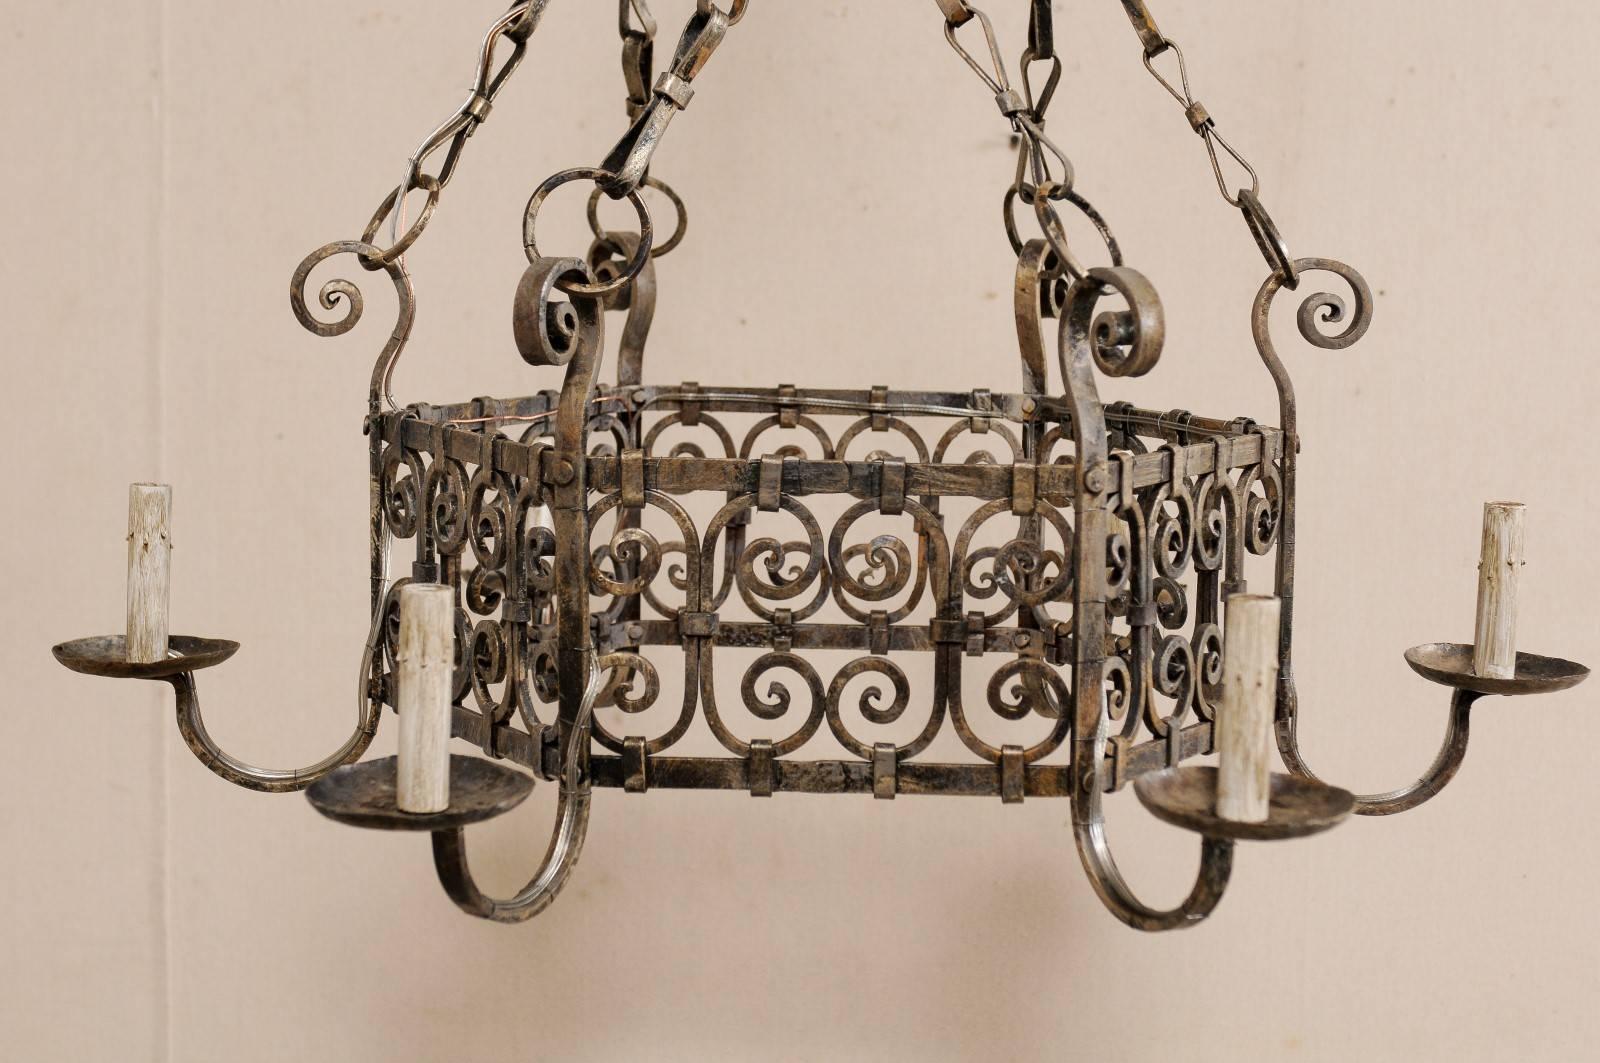 A French mid-century six-light iron chandelier. This lovely French chandelier from the mid-20th century has a rounded hexagon shaped central ring which is adorn in a series of connected scrolled designs. The six arms are attached around the